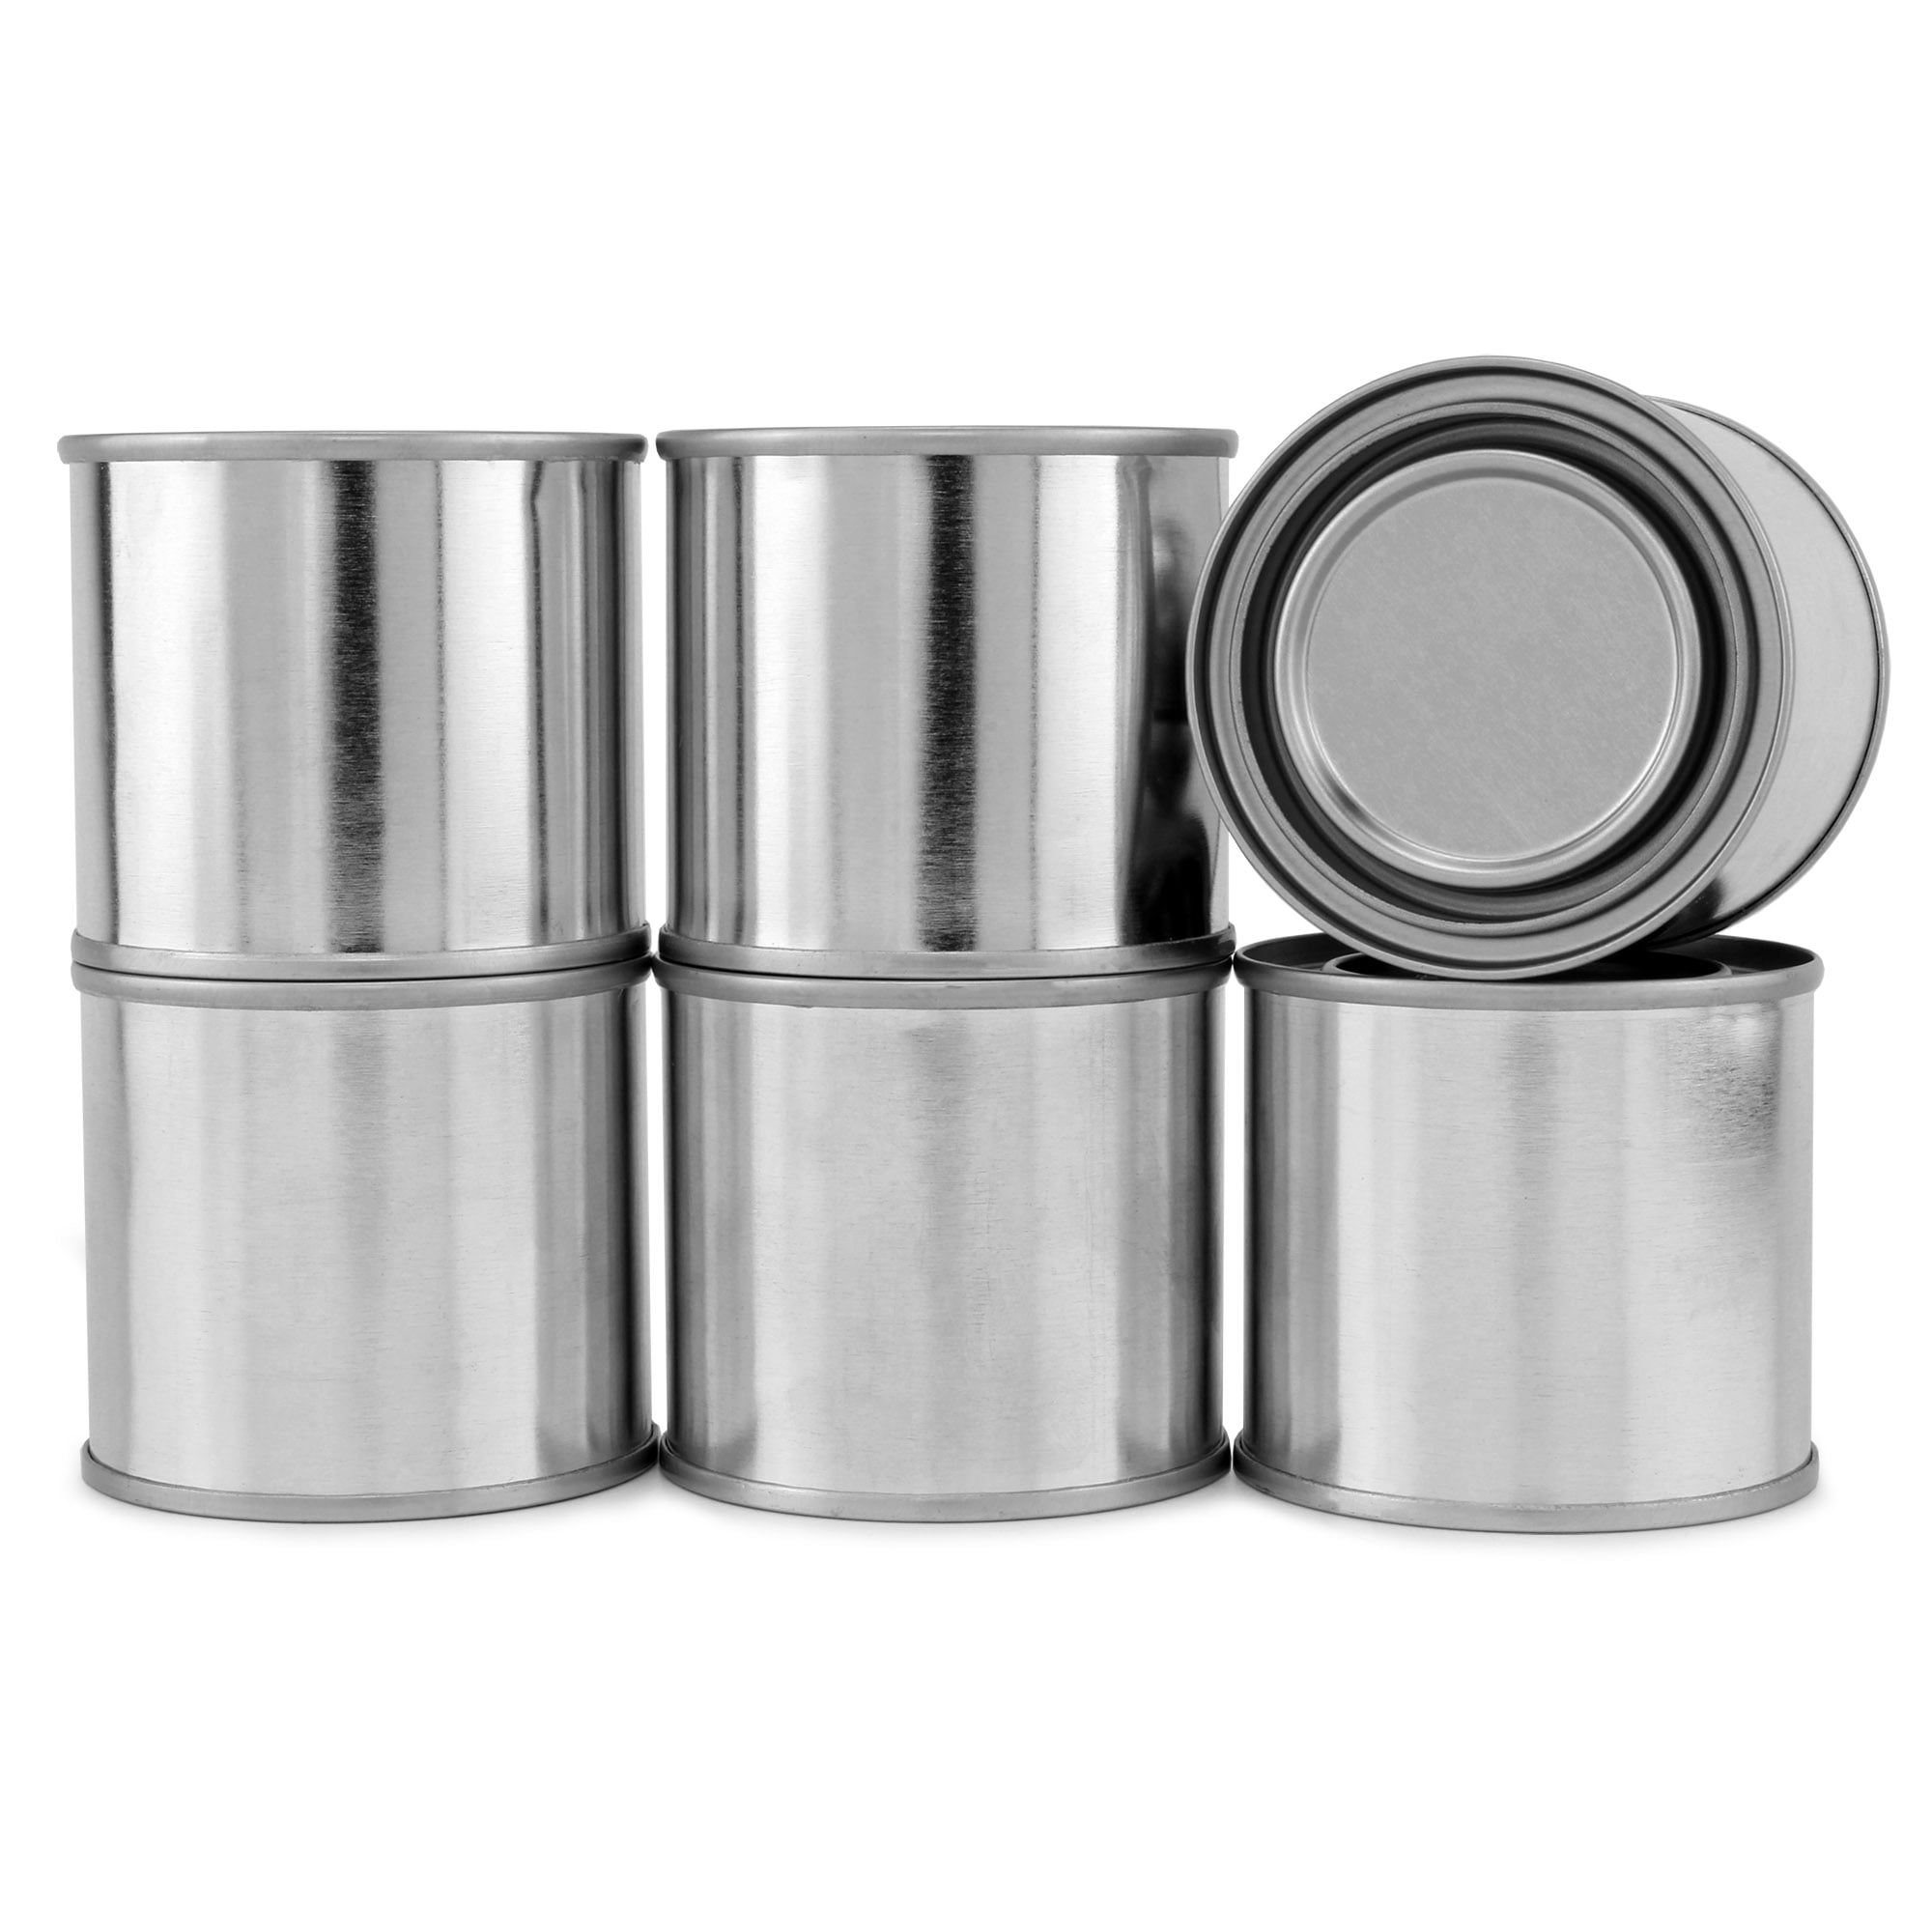 Blysk Empty Metal Quart Paint Cans with Lids Paint Storage Containers Unlined Multipurpose Storage Art & Crafts DIY Projects Painting Garage